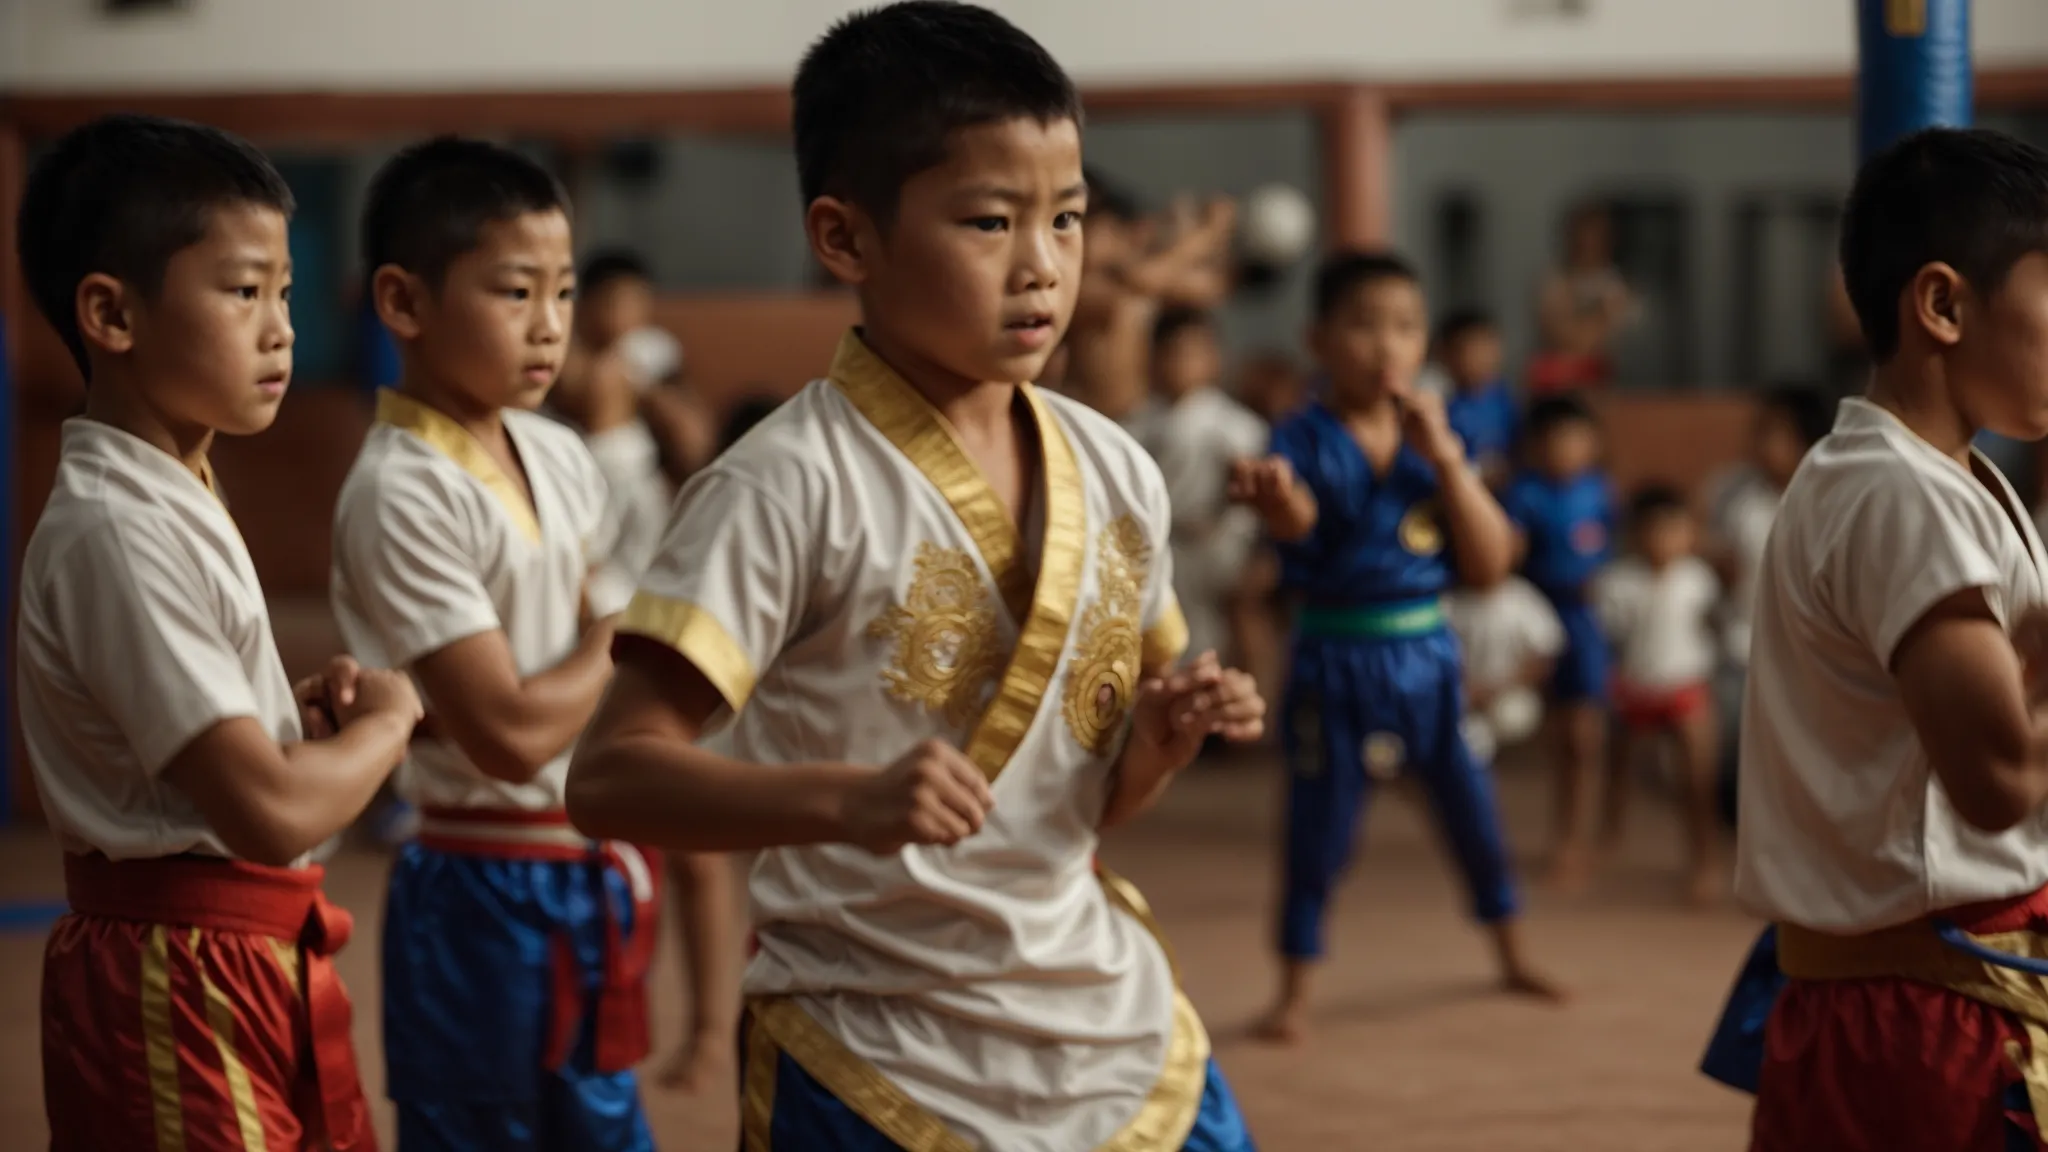 a circle of children in traditional muay thai attire, focused and attentive, as an instructor demonstrates a kick at the center of the dojo.